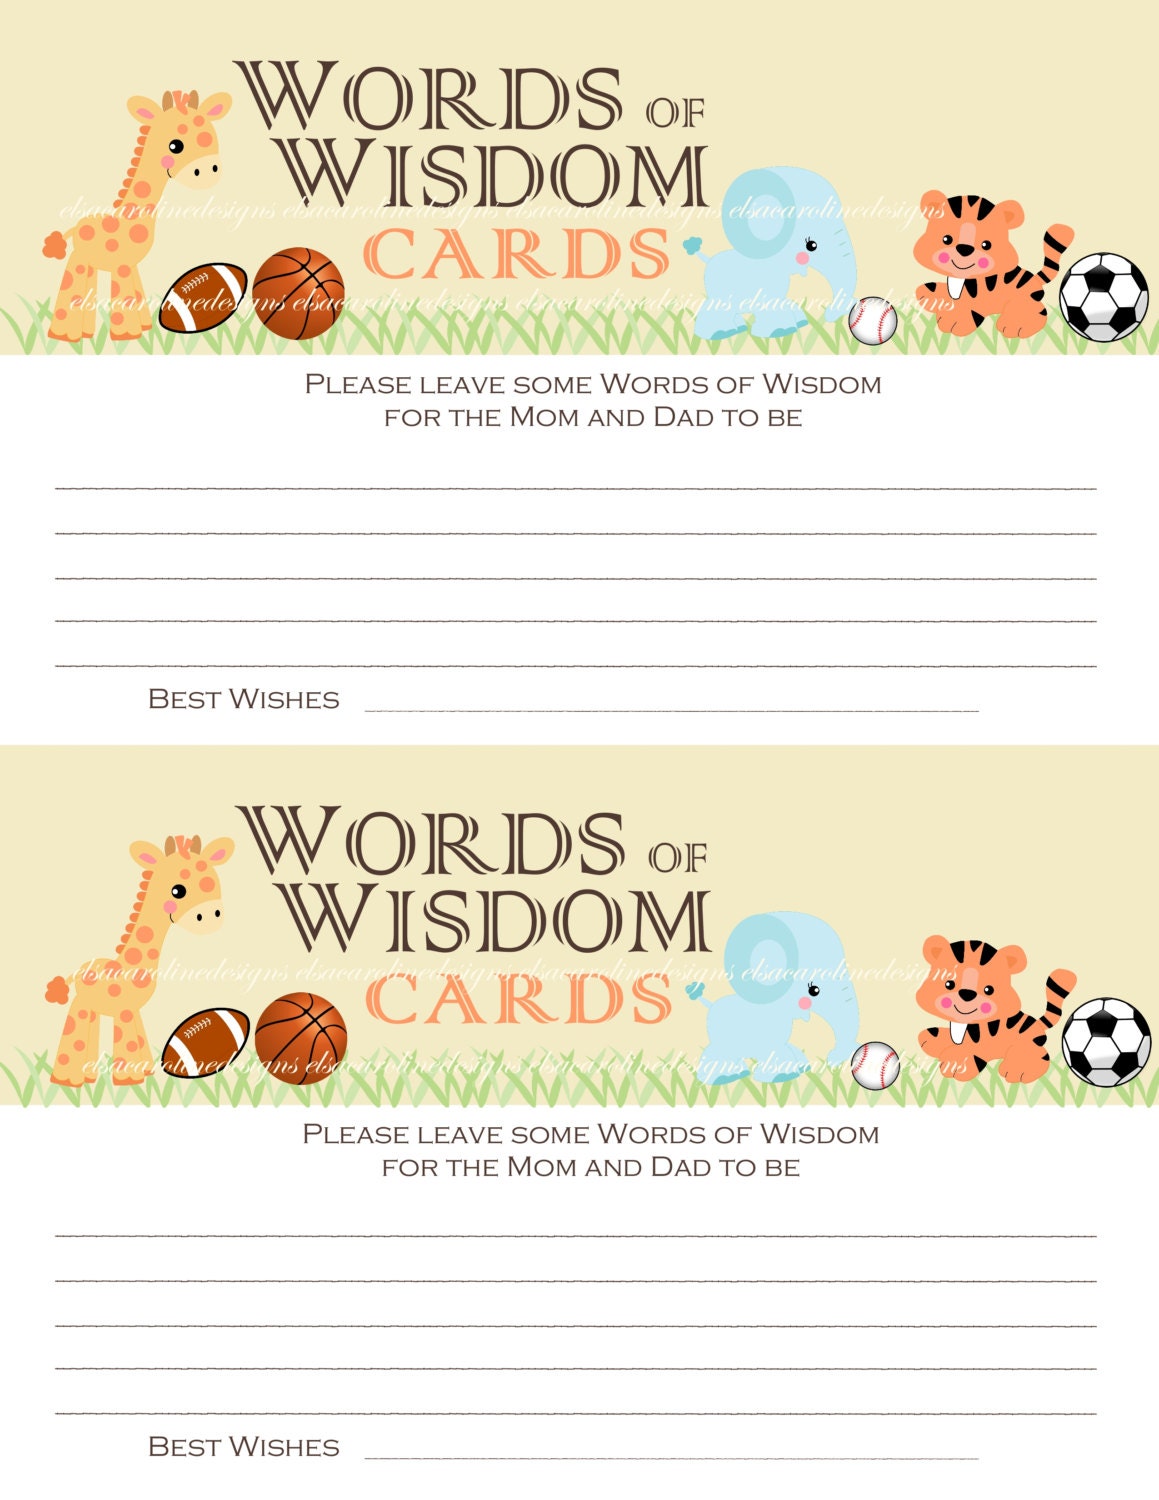 baby-shower-words-of-wisdom-cards-jungle-by-elsacarolinedesigns